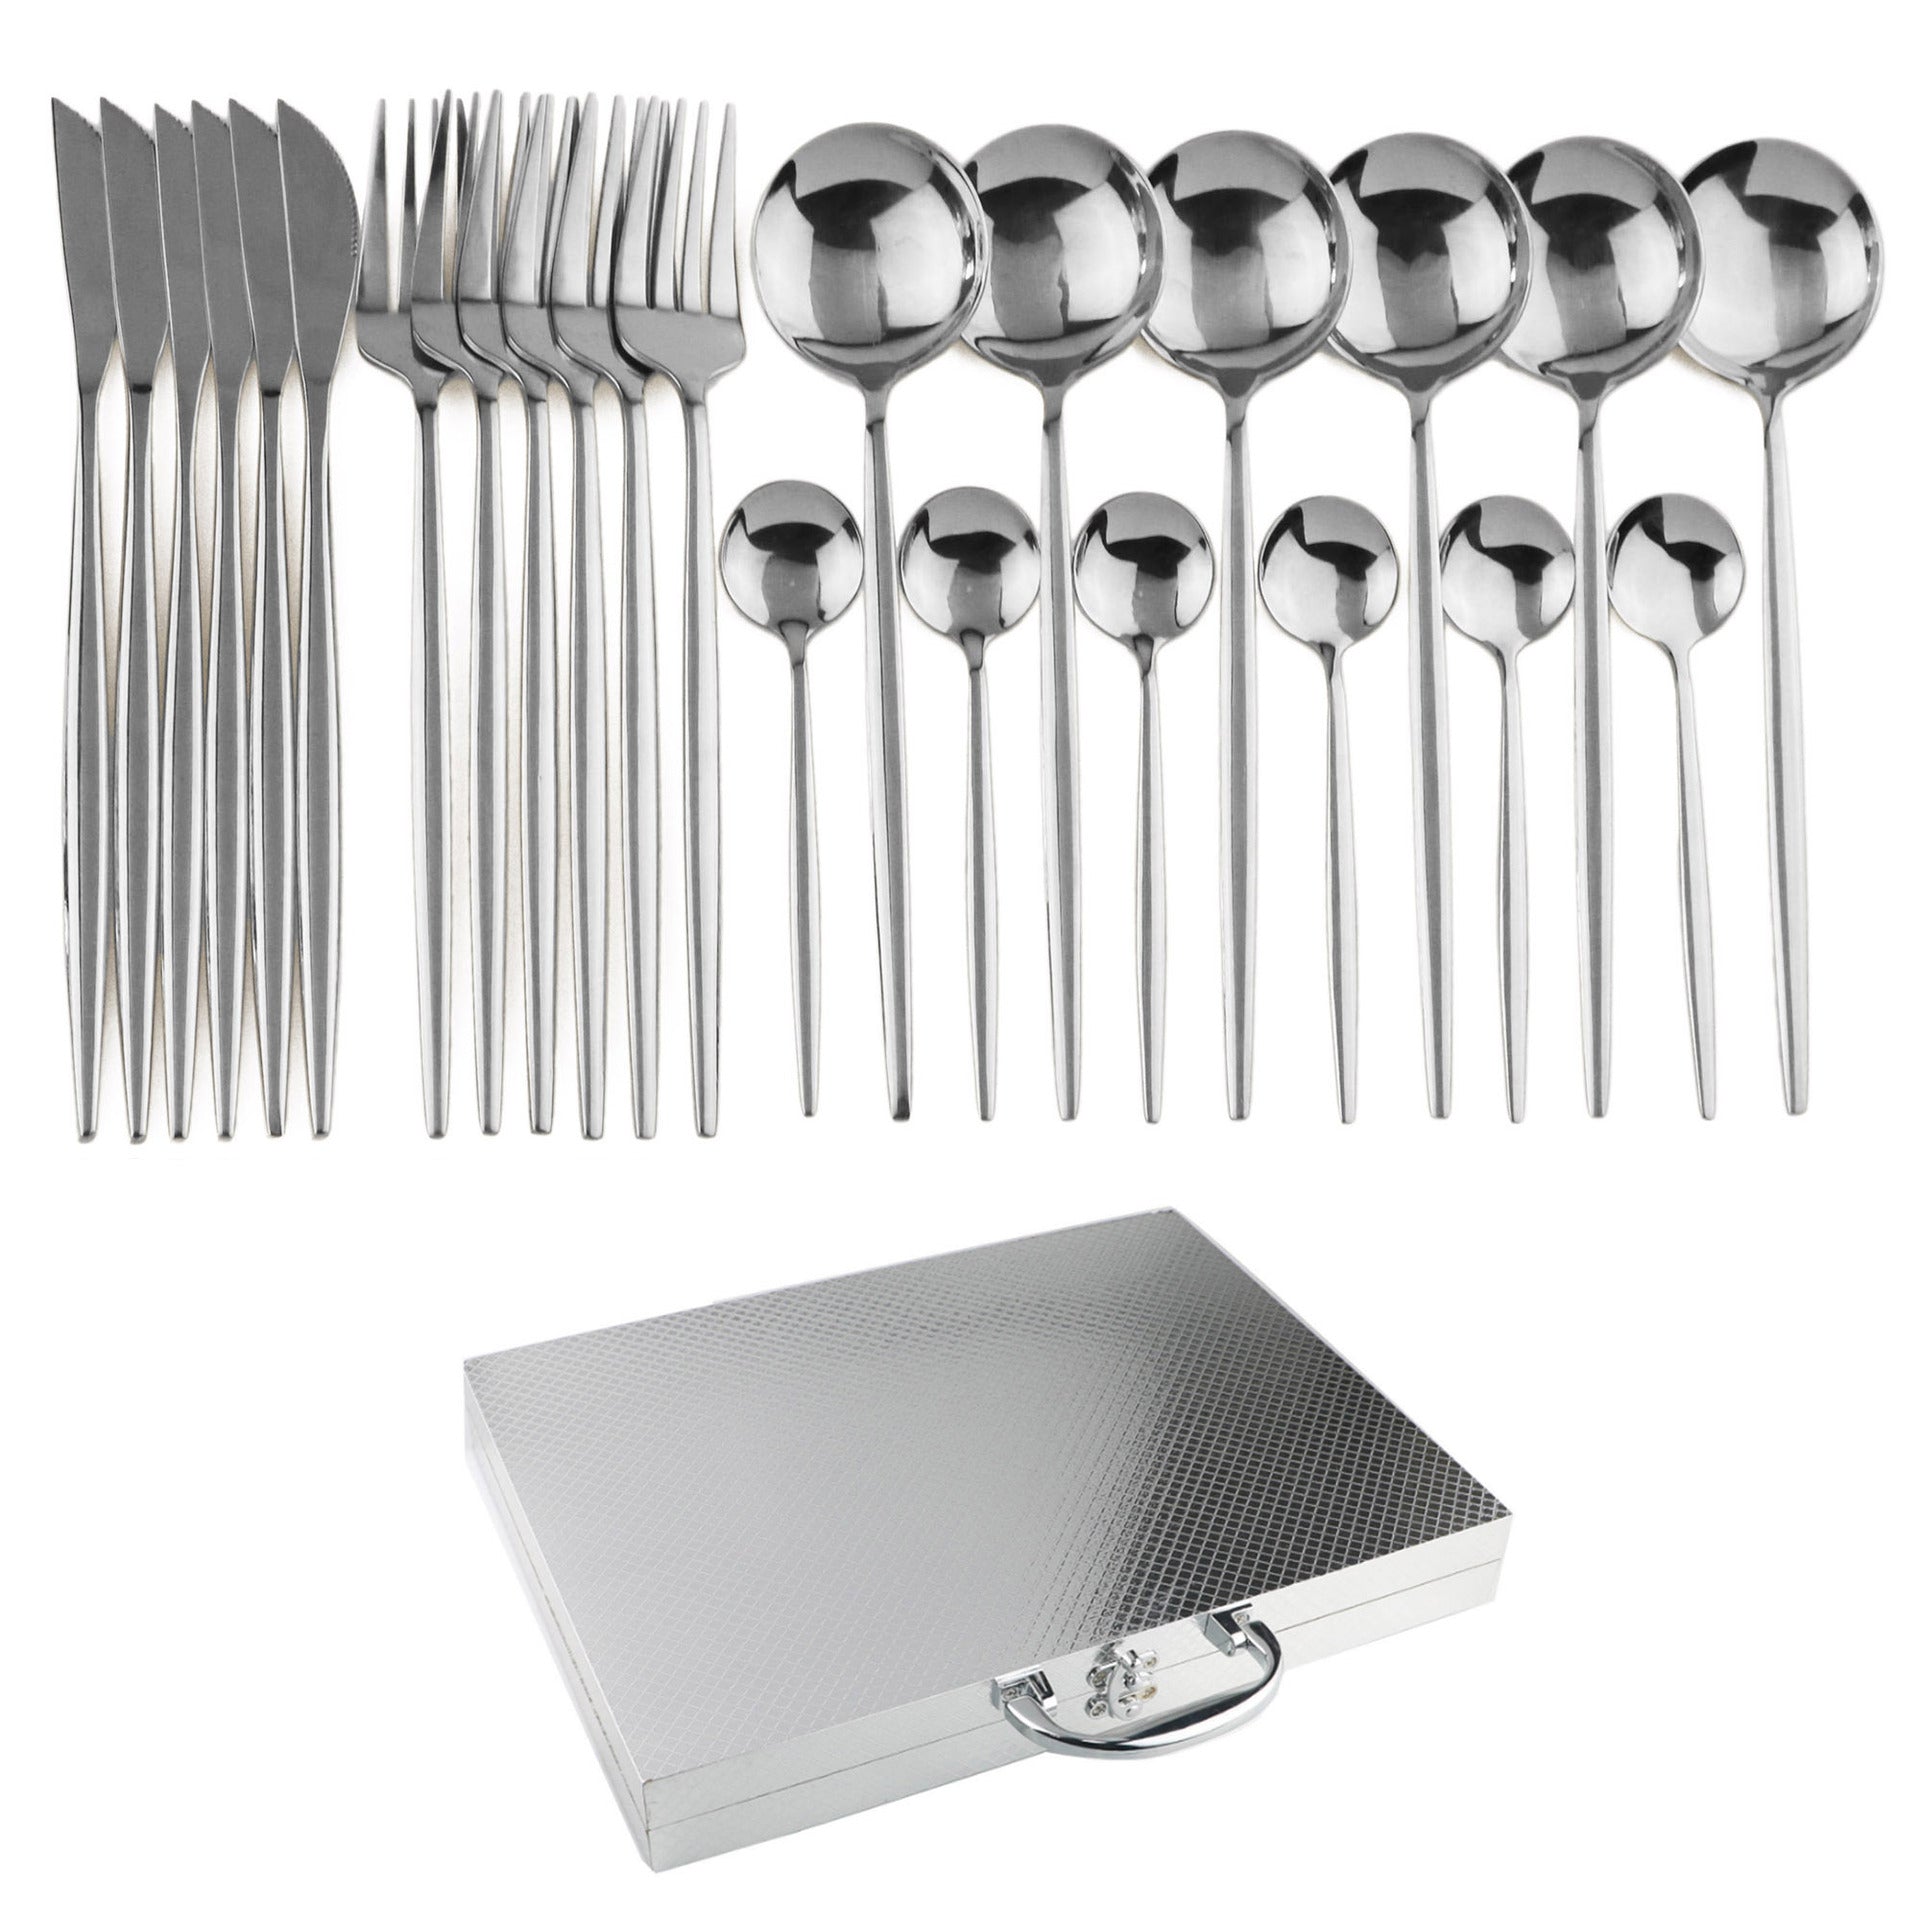 24-piece cutlery set made of stainless steel